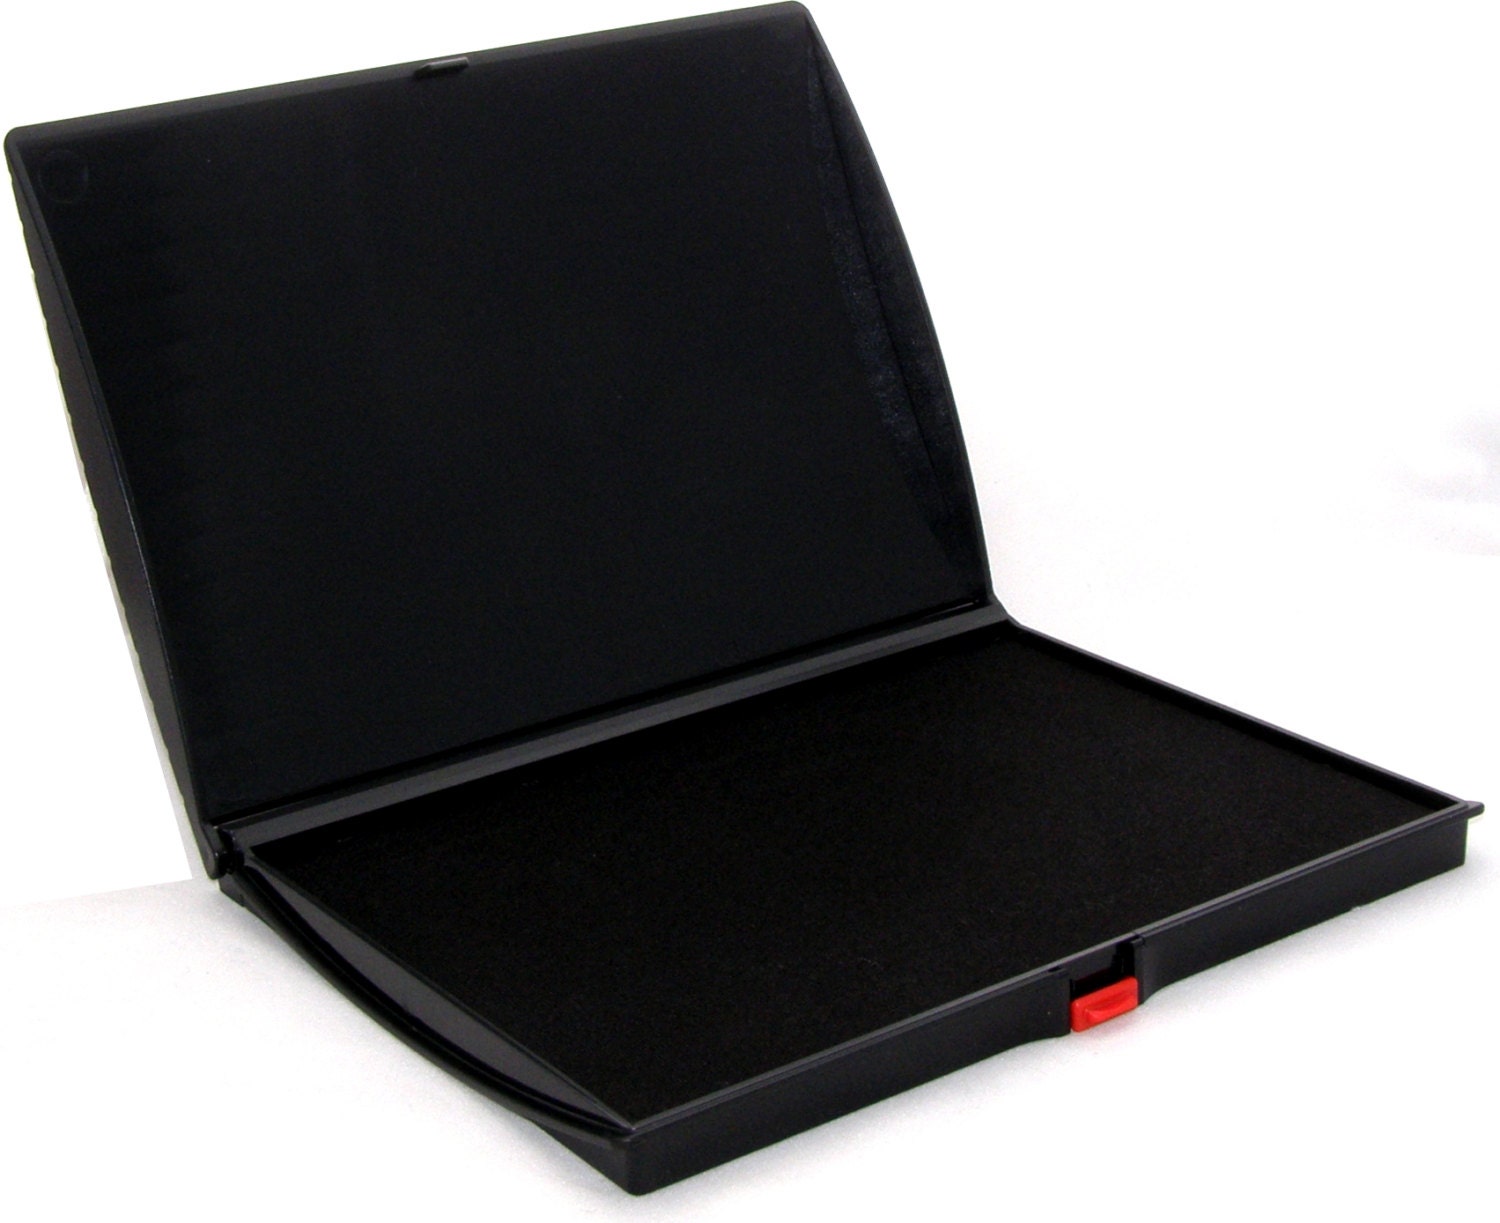 Extra Large Premium Black Ink Stamp Pad - 5 inch by 7 inch - Quality Felt Pad